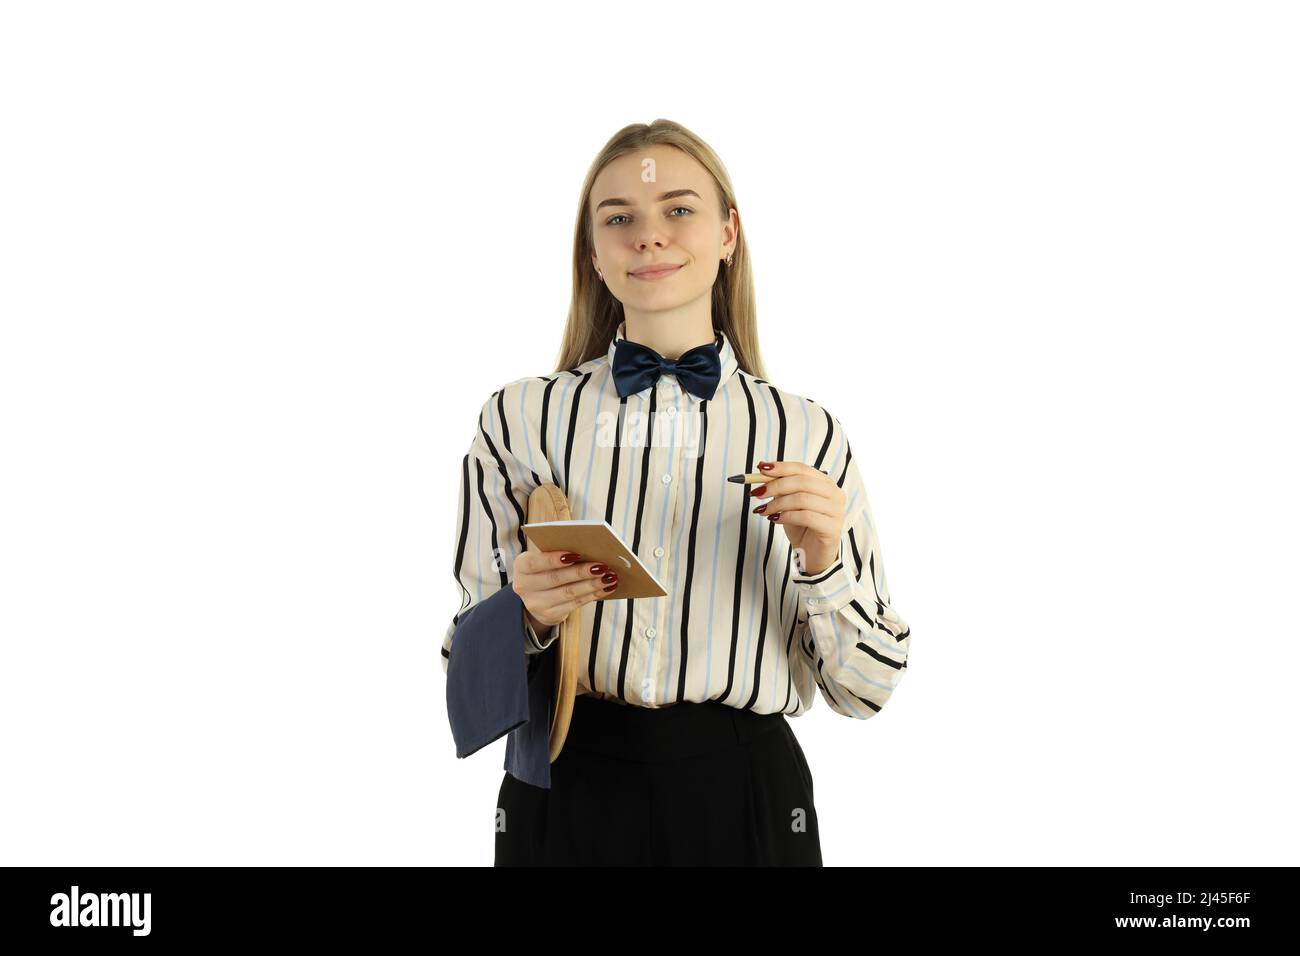 Young waiter woman isolated on white background Stock Photo